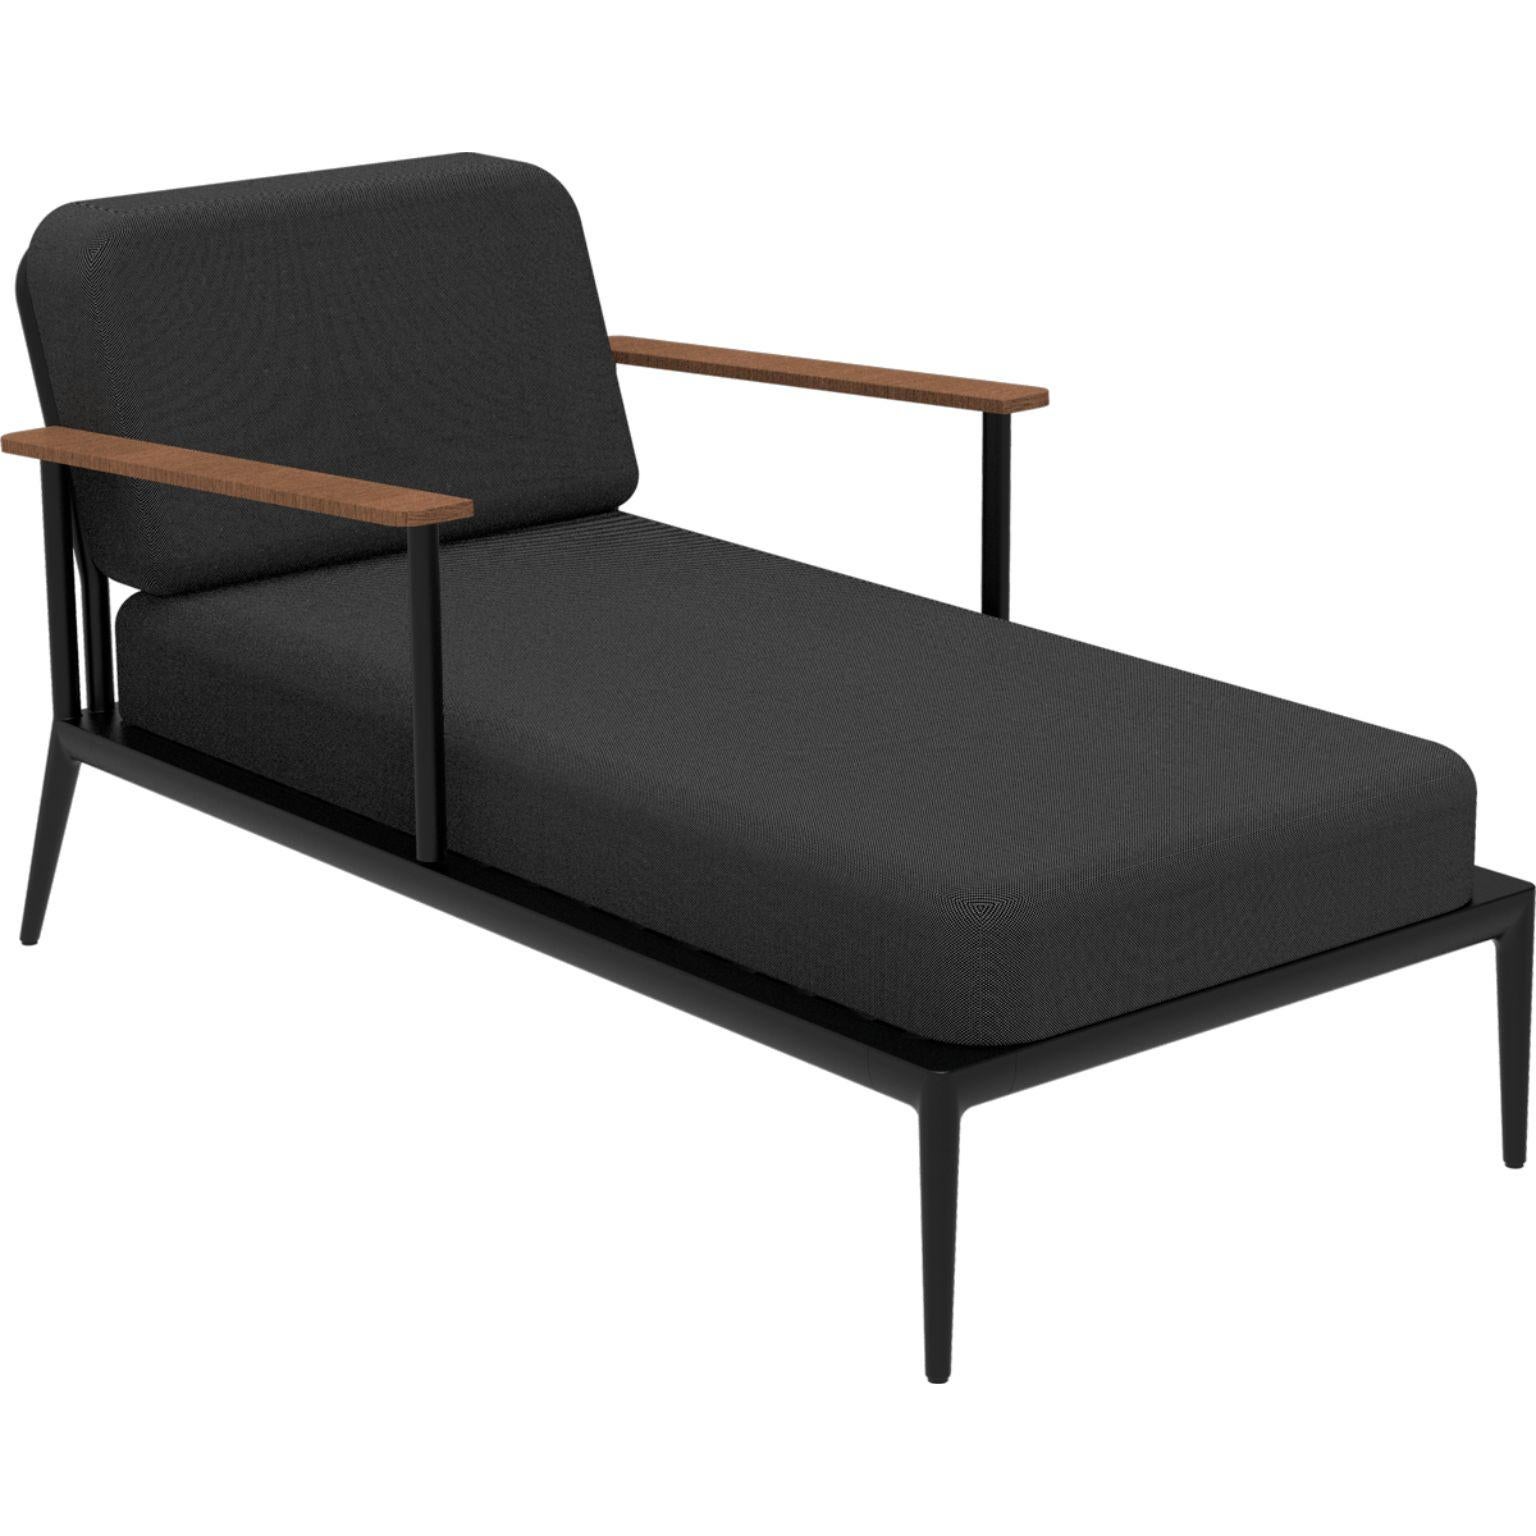 Nature Black Divan by MOWEE
Dimensions: D155 x W83 x H81 cm (seat height 42 cm).
Material: Aluminum, upholstery and Iroko wood.
Weight: 30 kg.
Also available in different colors and finishes. Please contact us.

An unmistakable collection for